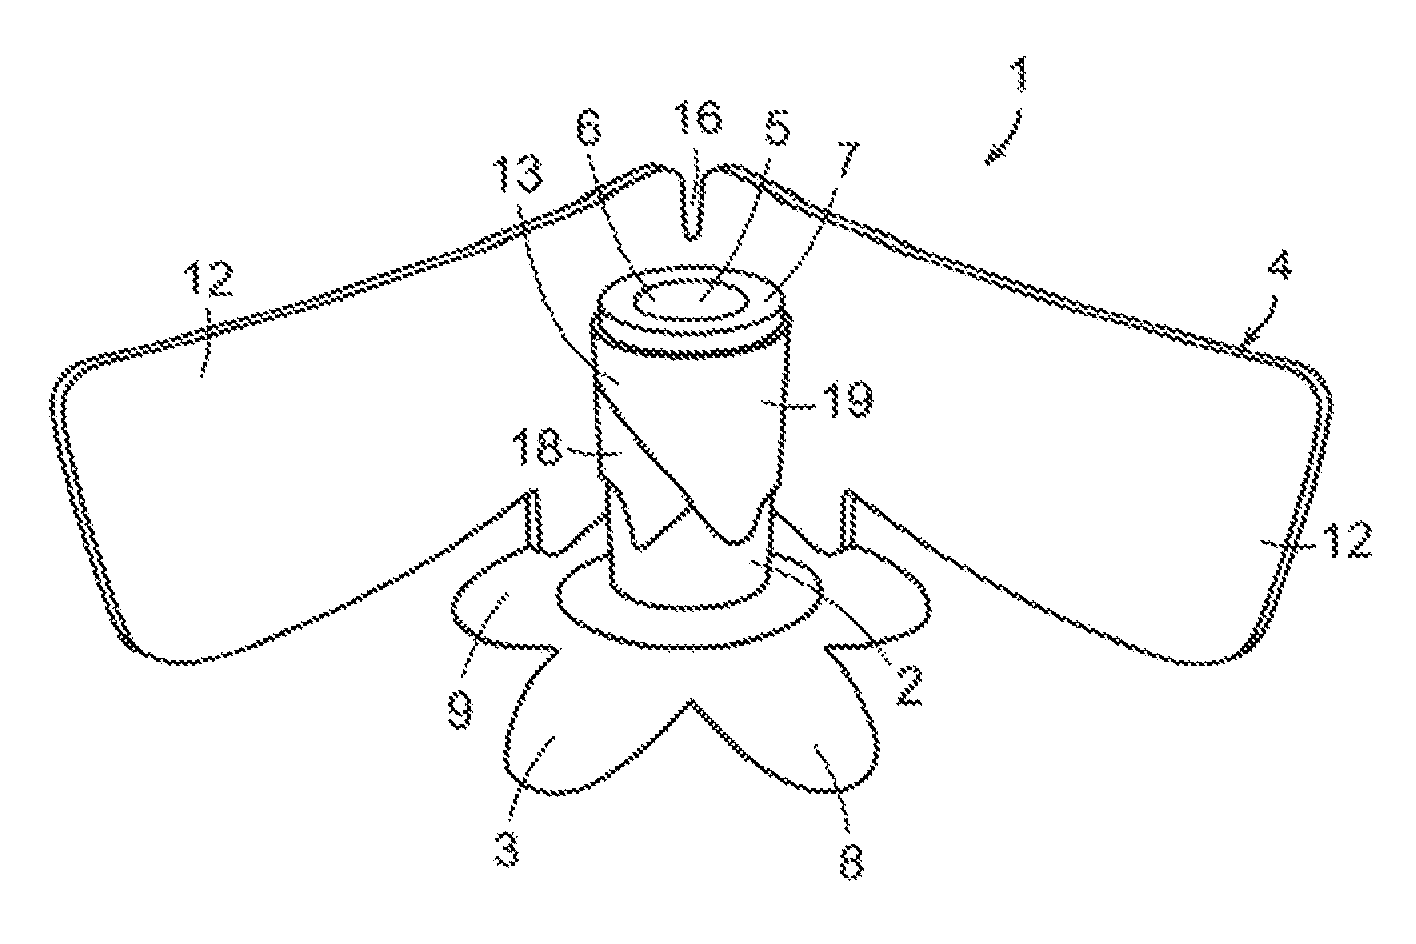 Male external incontinence device